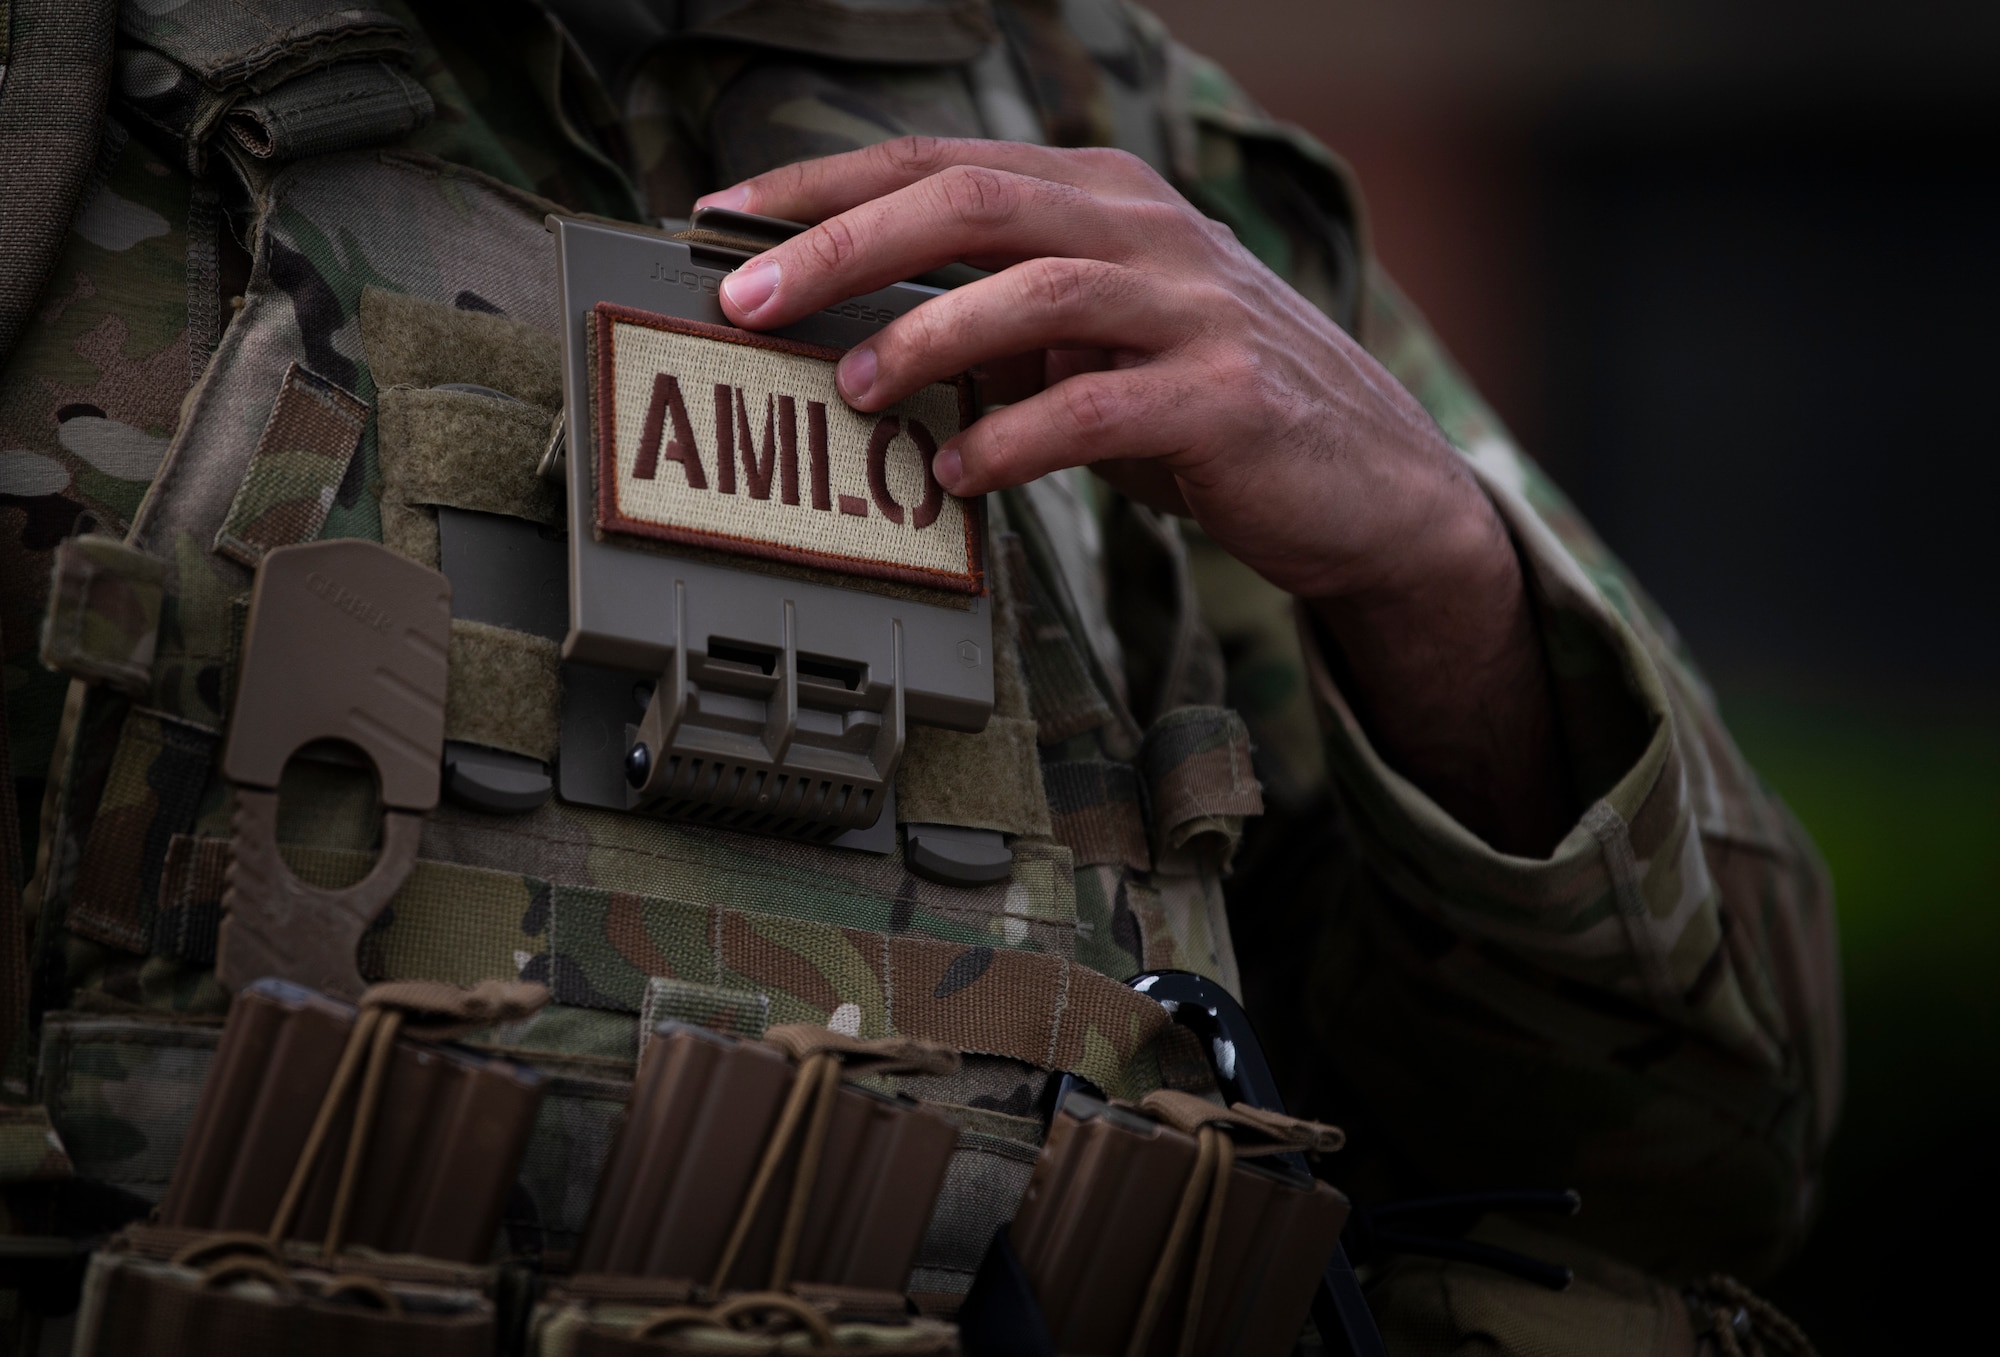 U.S. Air Force Lt. Col. Vincent Levraea, a 621st Mobility Support Operations Squadron air mobility liason officer, adjusts his interceptor body armor during Exercise SWAMP AVENGER 24-2 at North Auxillary Field, South Carolina, April 2, 2024.